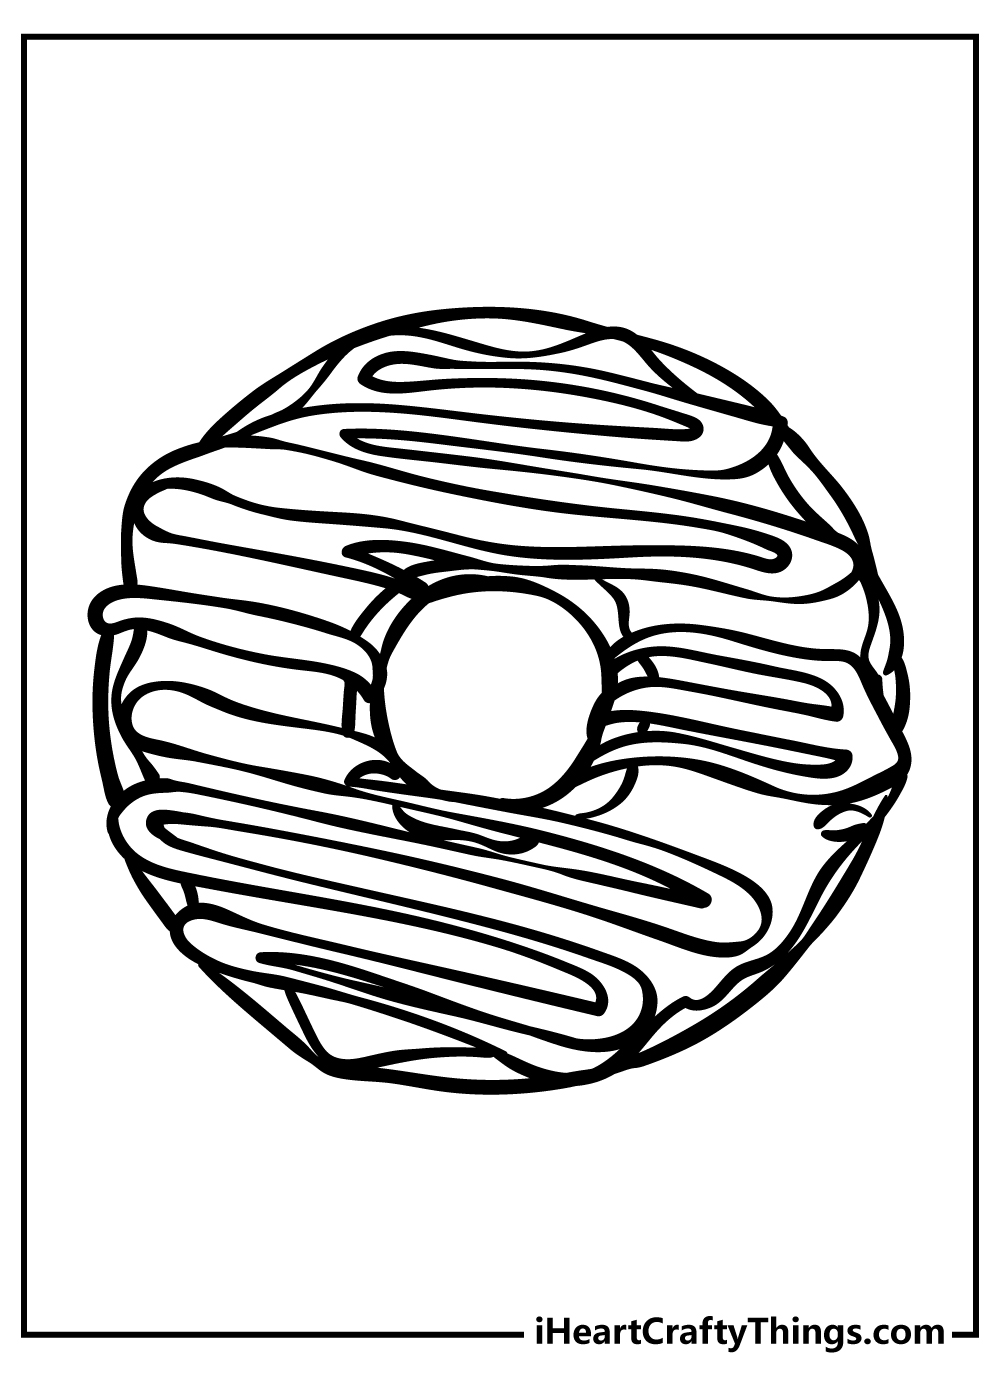 20 Free Printable Donut Coloring Pages